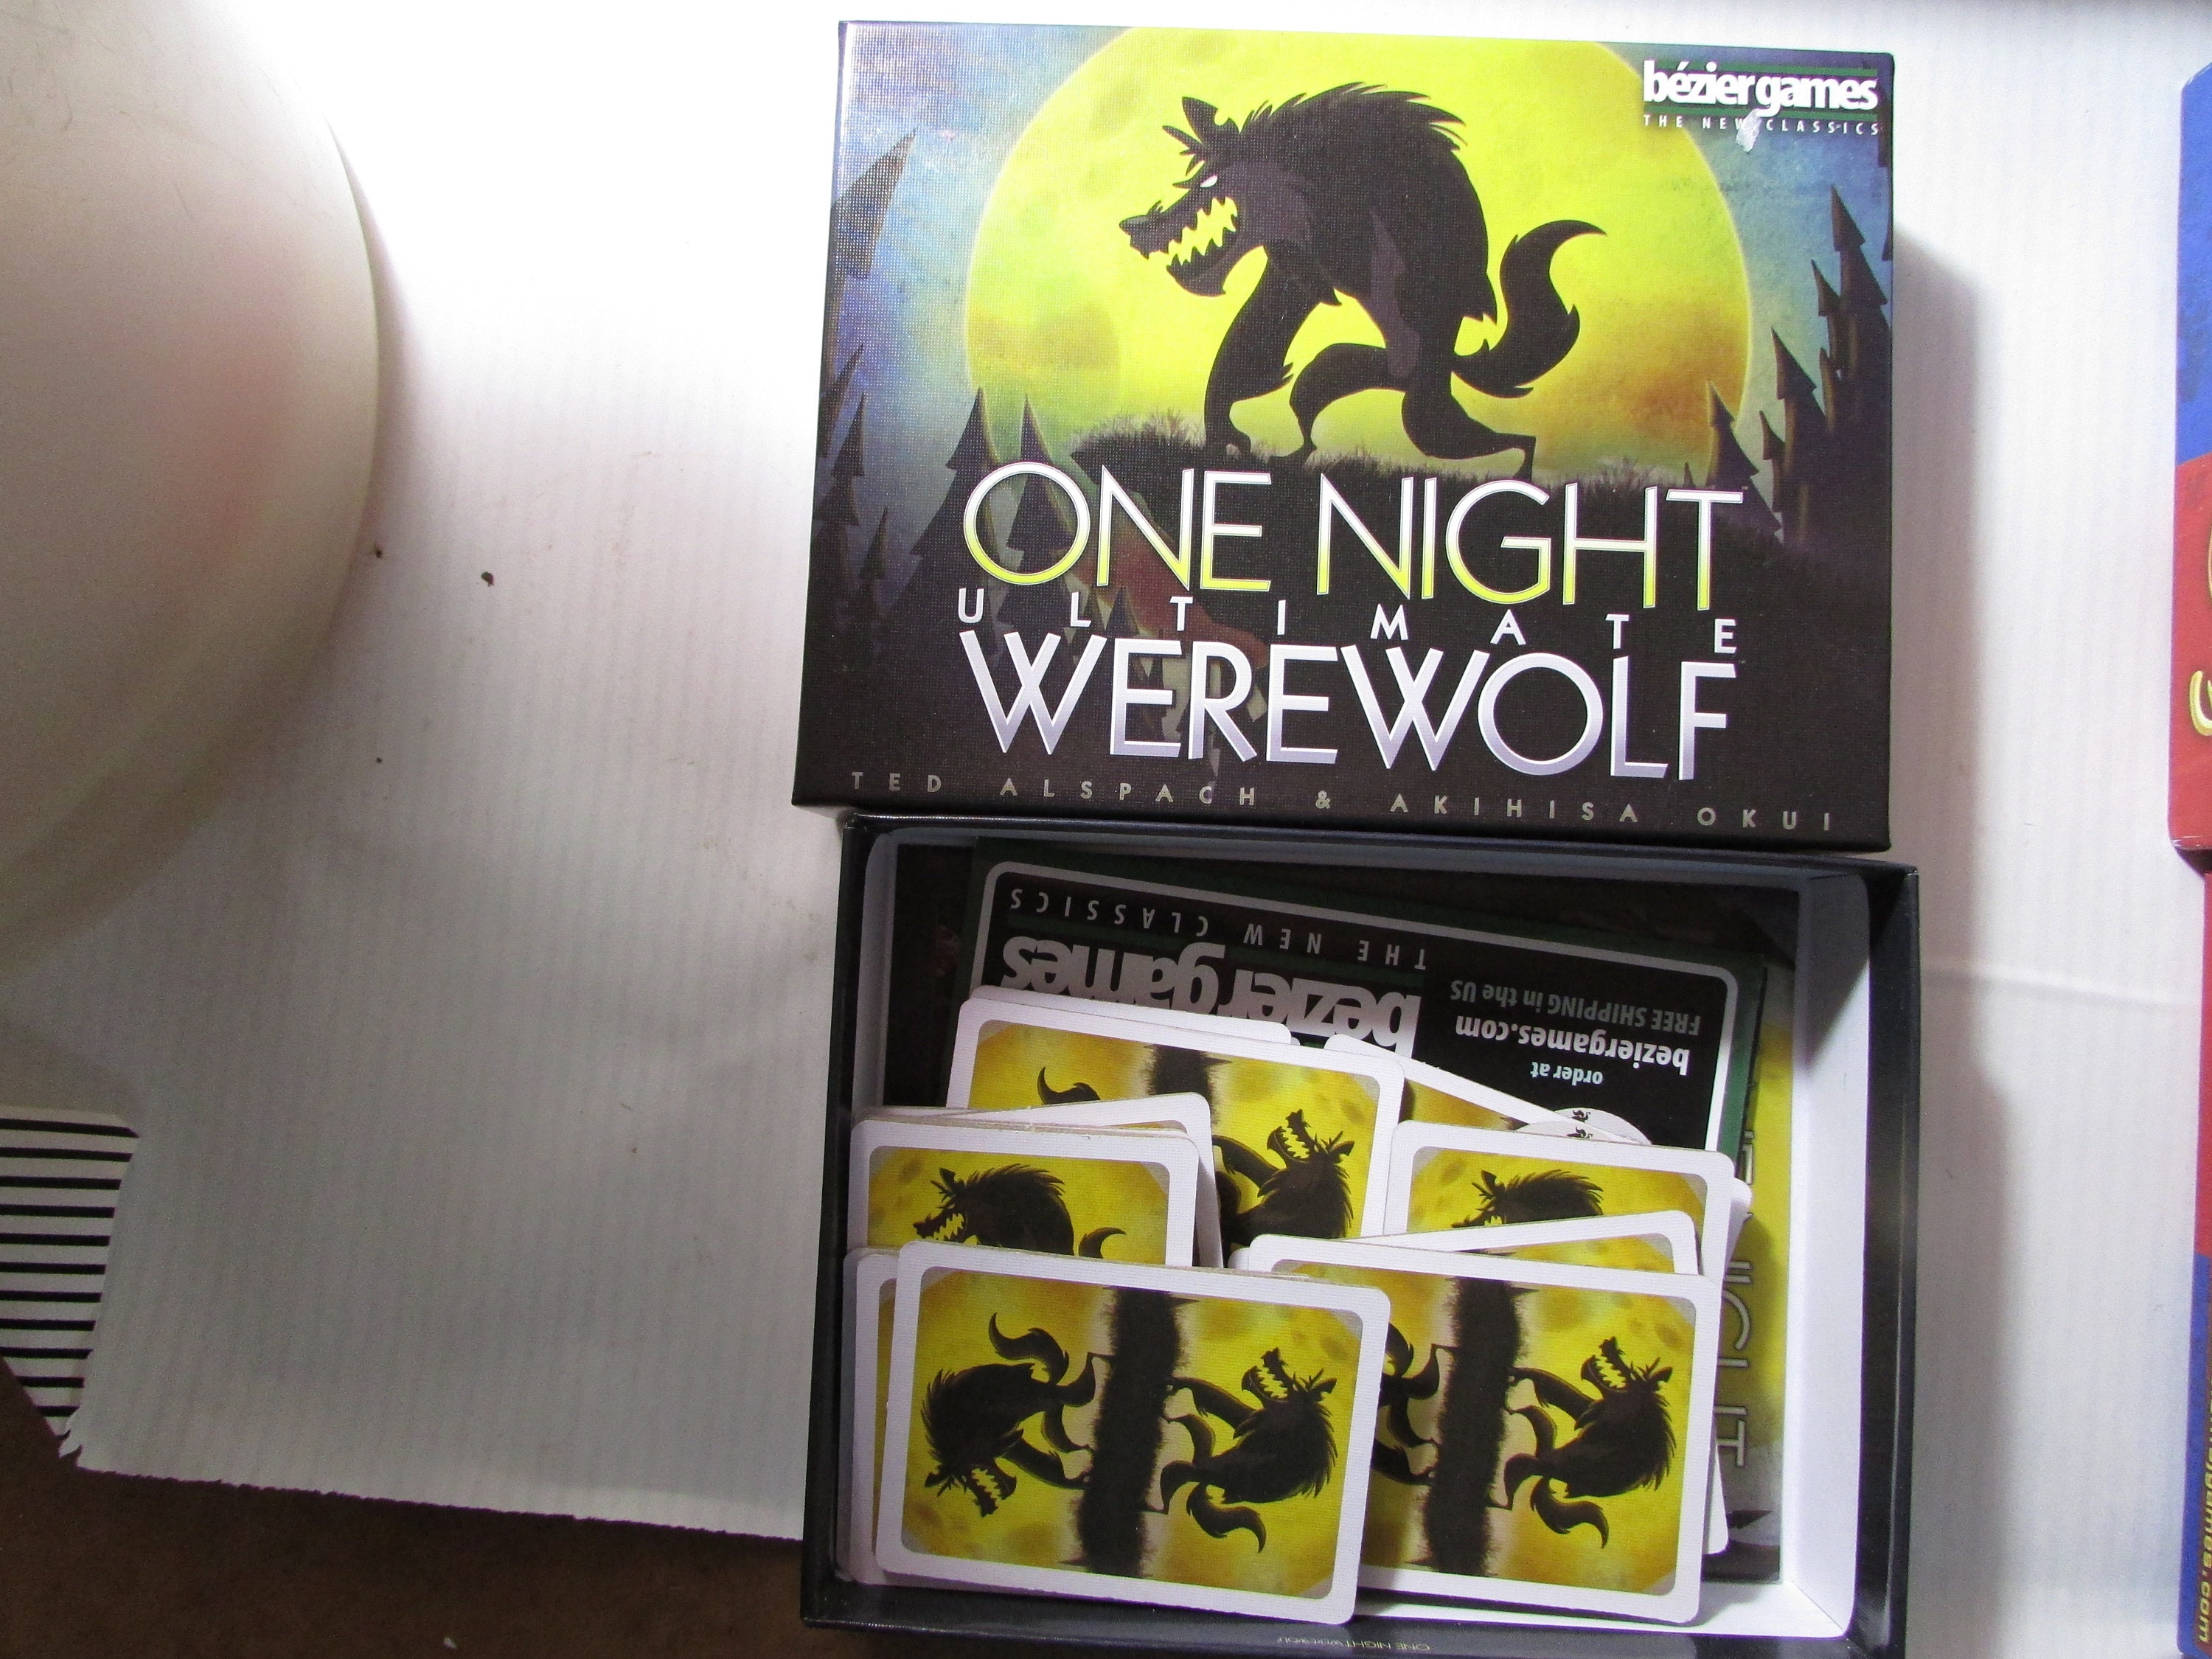 Host the ultimate Halloween party with One Night Ultimate Werewolf